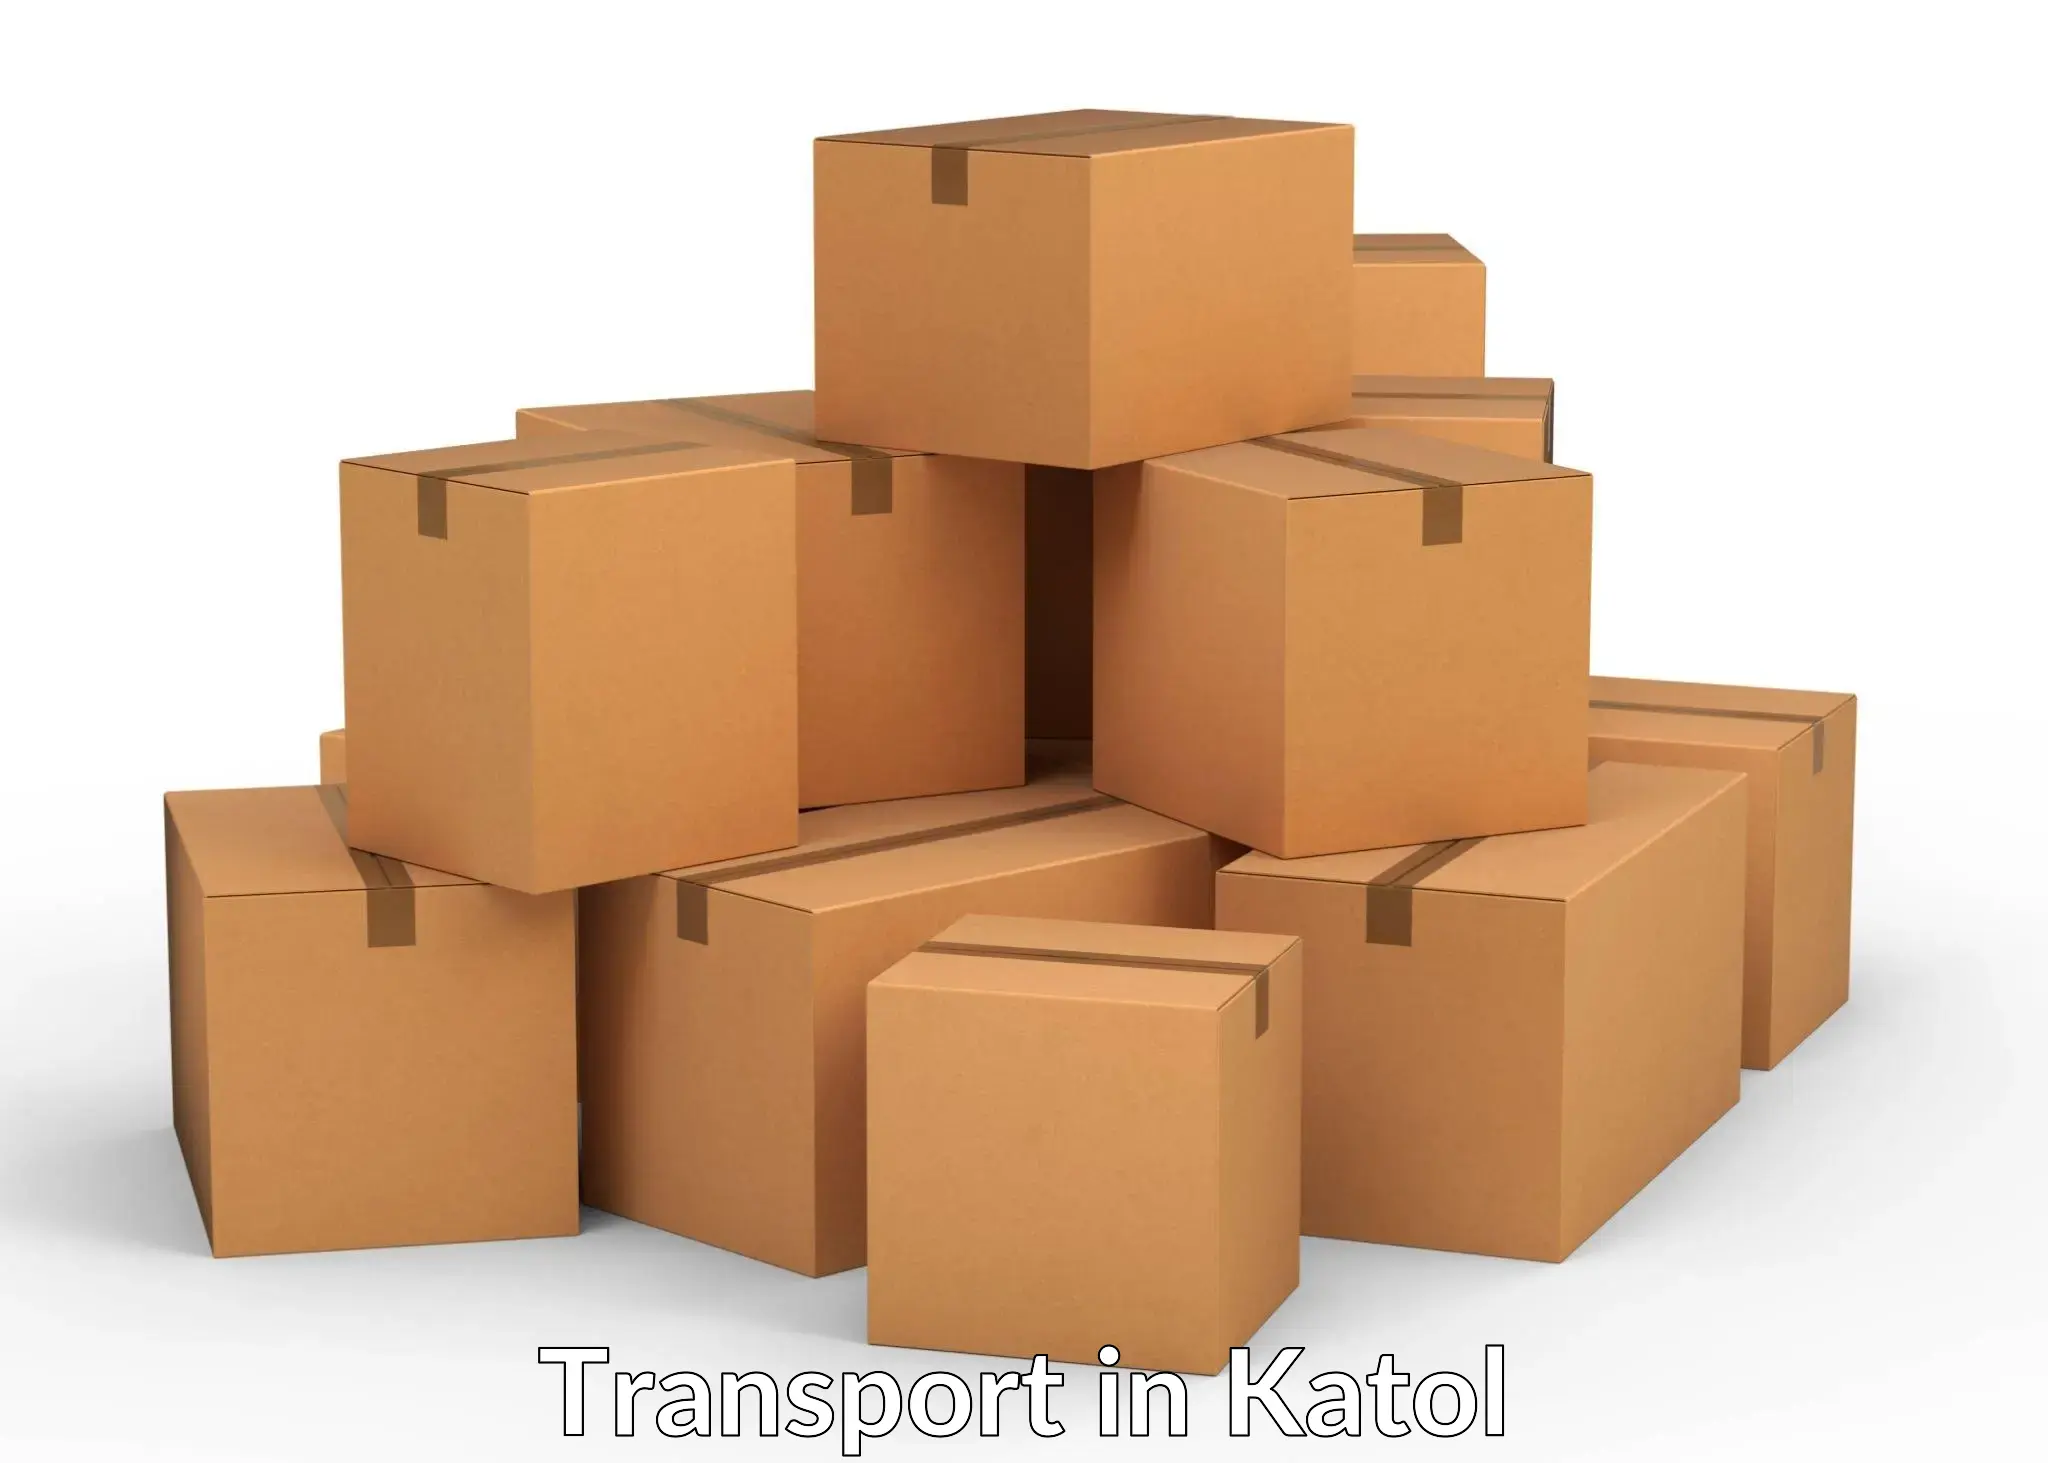 Luggage transport services in Katol